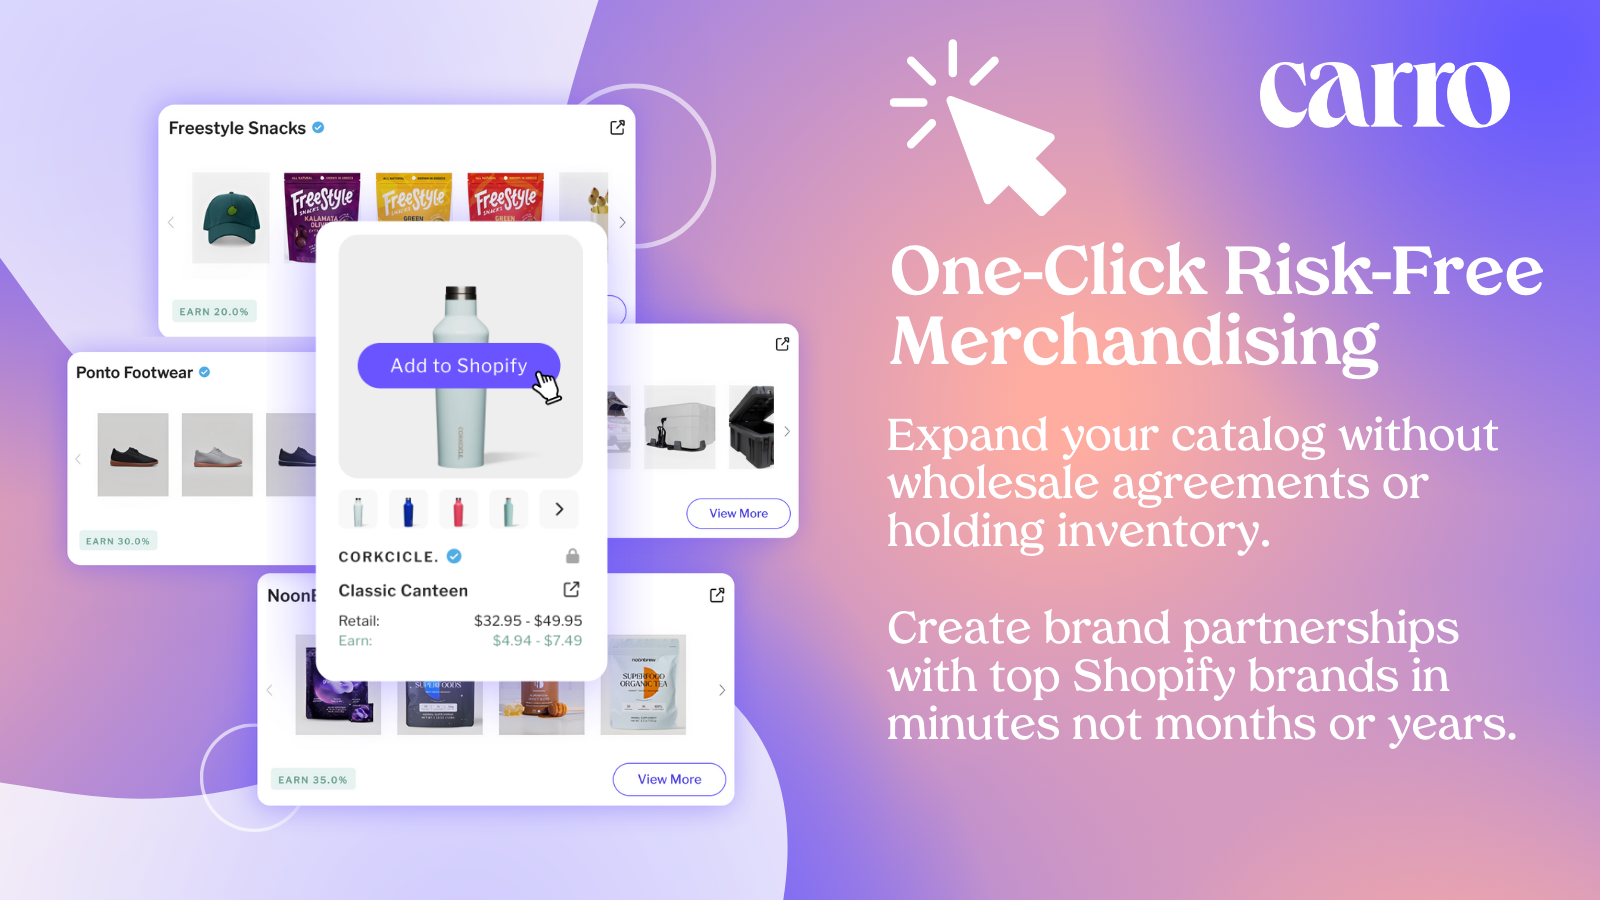 Add products from other top Shopify stores.